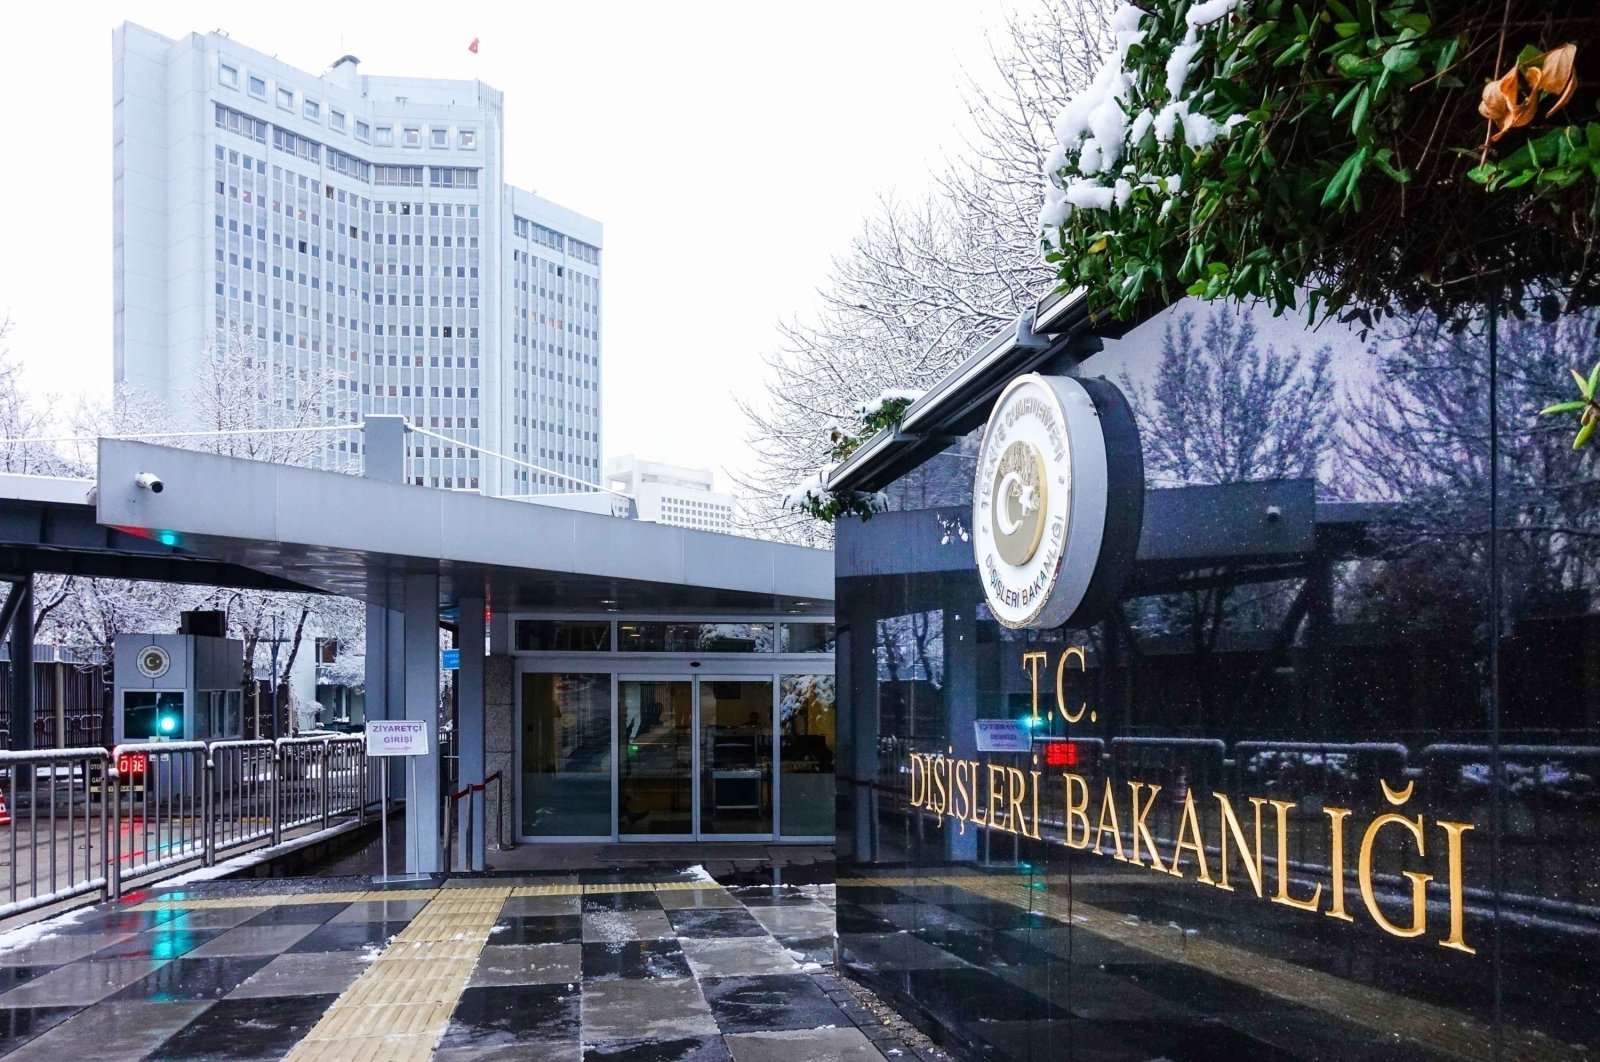 The ministry of Foreign Affairs headquarters in Ankara, Türkiye, is seen in this undated file photo. (File Photo)